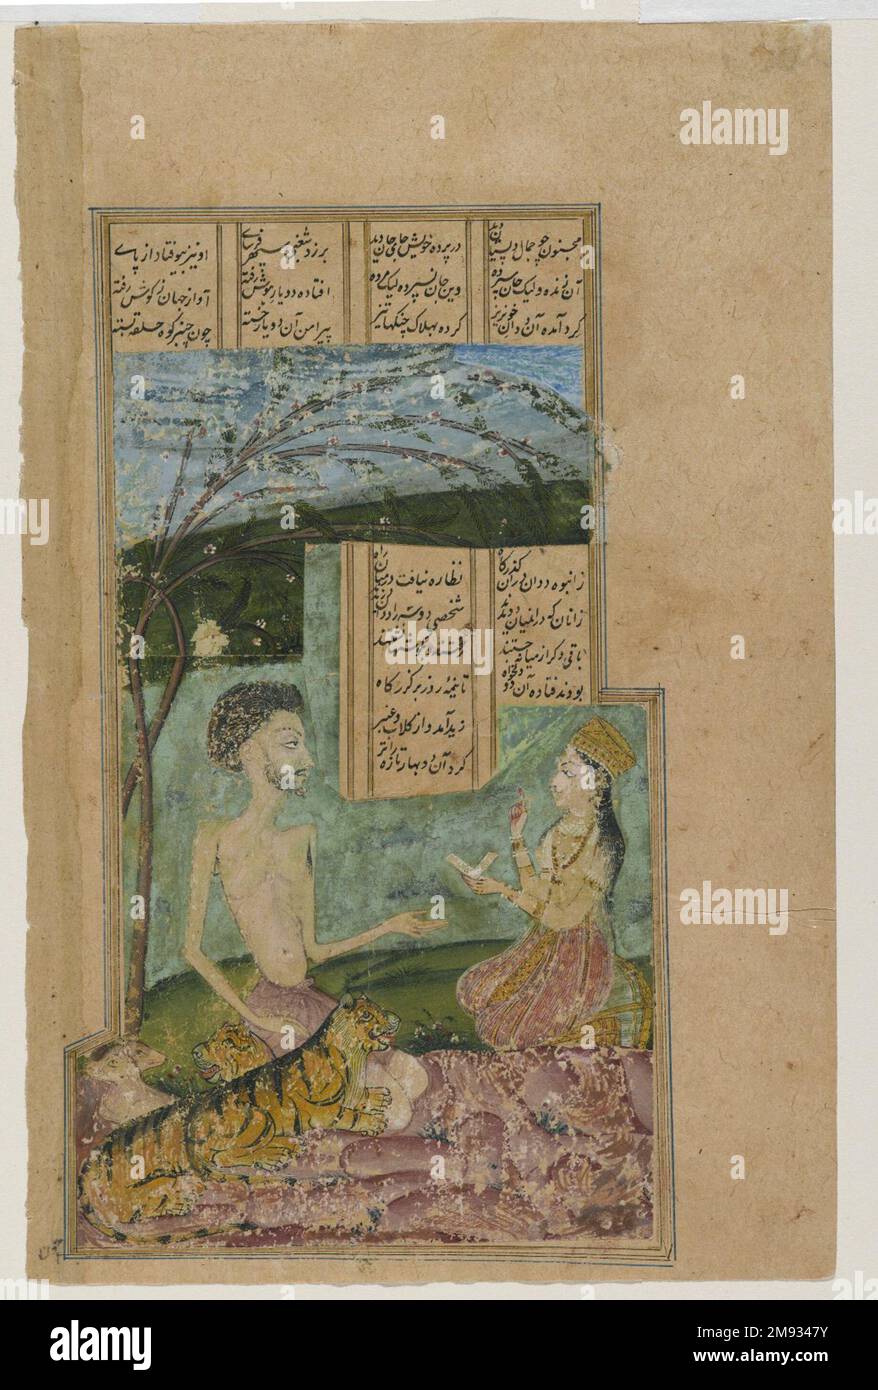 Layli visits Majnun in the Grove Indian. Layli visits Majnun in the Grove, 17th century. Ink and opaque watercolor on paper, sheet: 9 3/8 x 6 in. (23.8 x 15.2 cm).  One of the best models for mystical love in the Islamic world is the tragic hero Majnun, whose love for Layli ultimately drove him to insanity and exile. Although the story’s roots lie in an Arabic tale, it is the subject of one of the five narrative poems of the Khamsa (Quintet), by the Persian poet Nizami of Ganja (1141–1209), and from Iran it spread to India. Illustrations of Majnun in the wilderness are common in eastern Islami Stock Photo